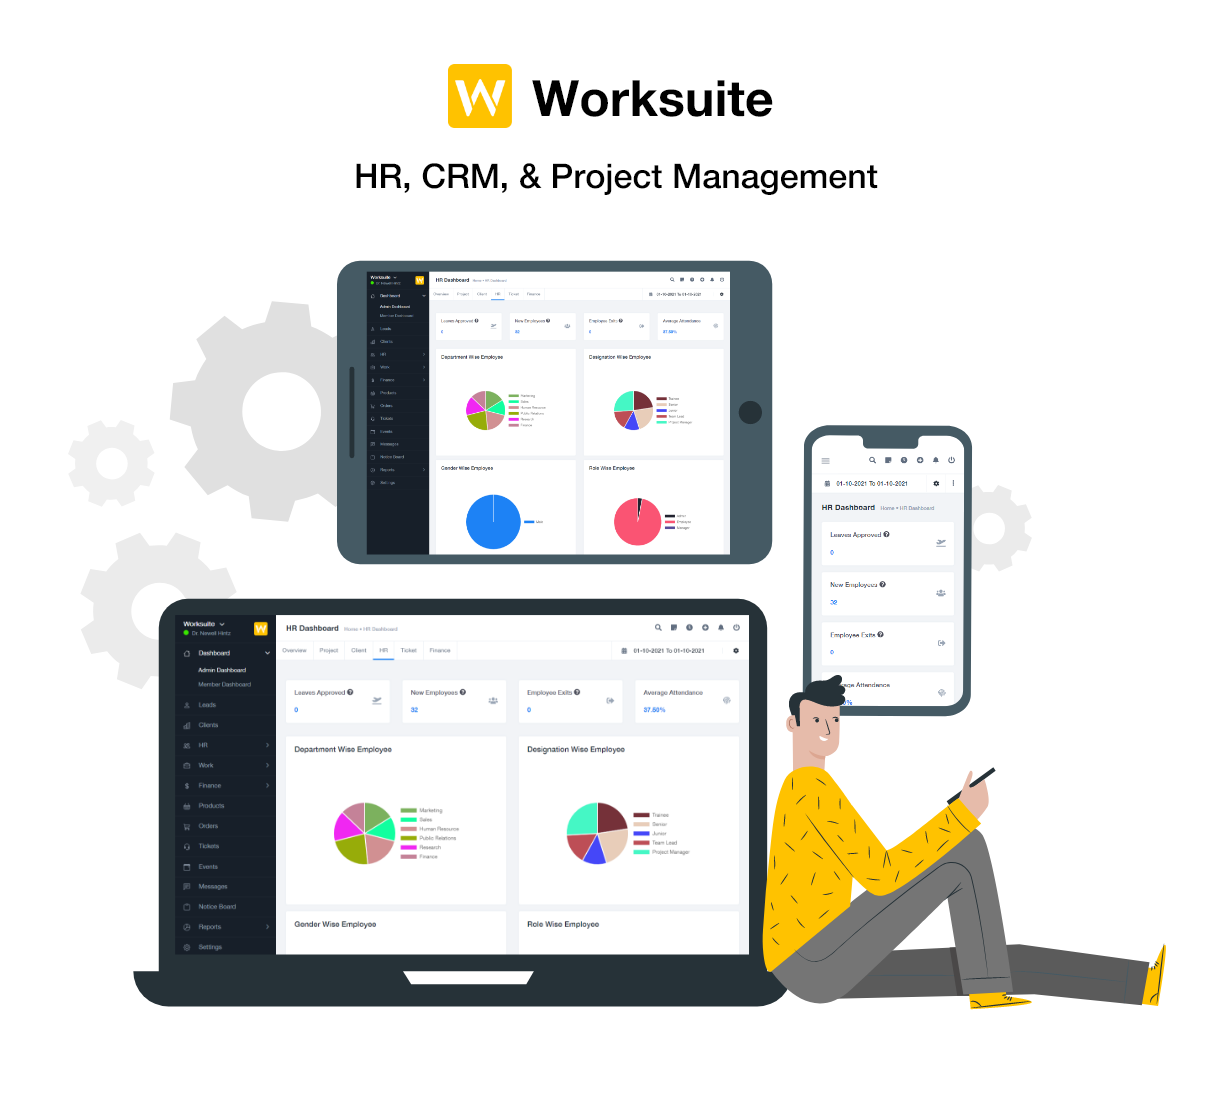 WORKSUITE - HR, CRM and Project Management - 11